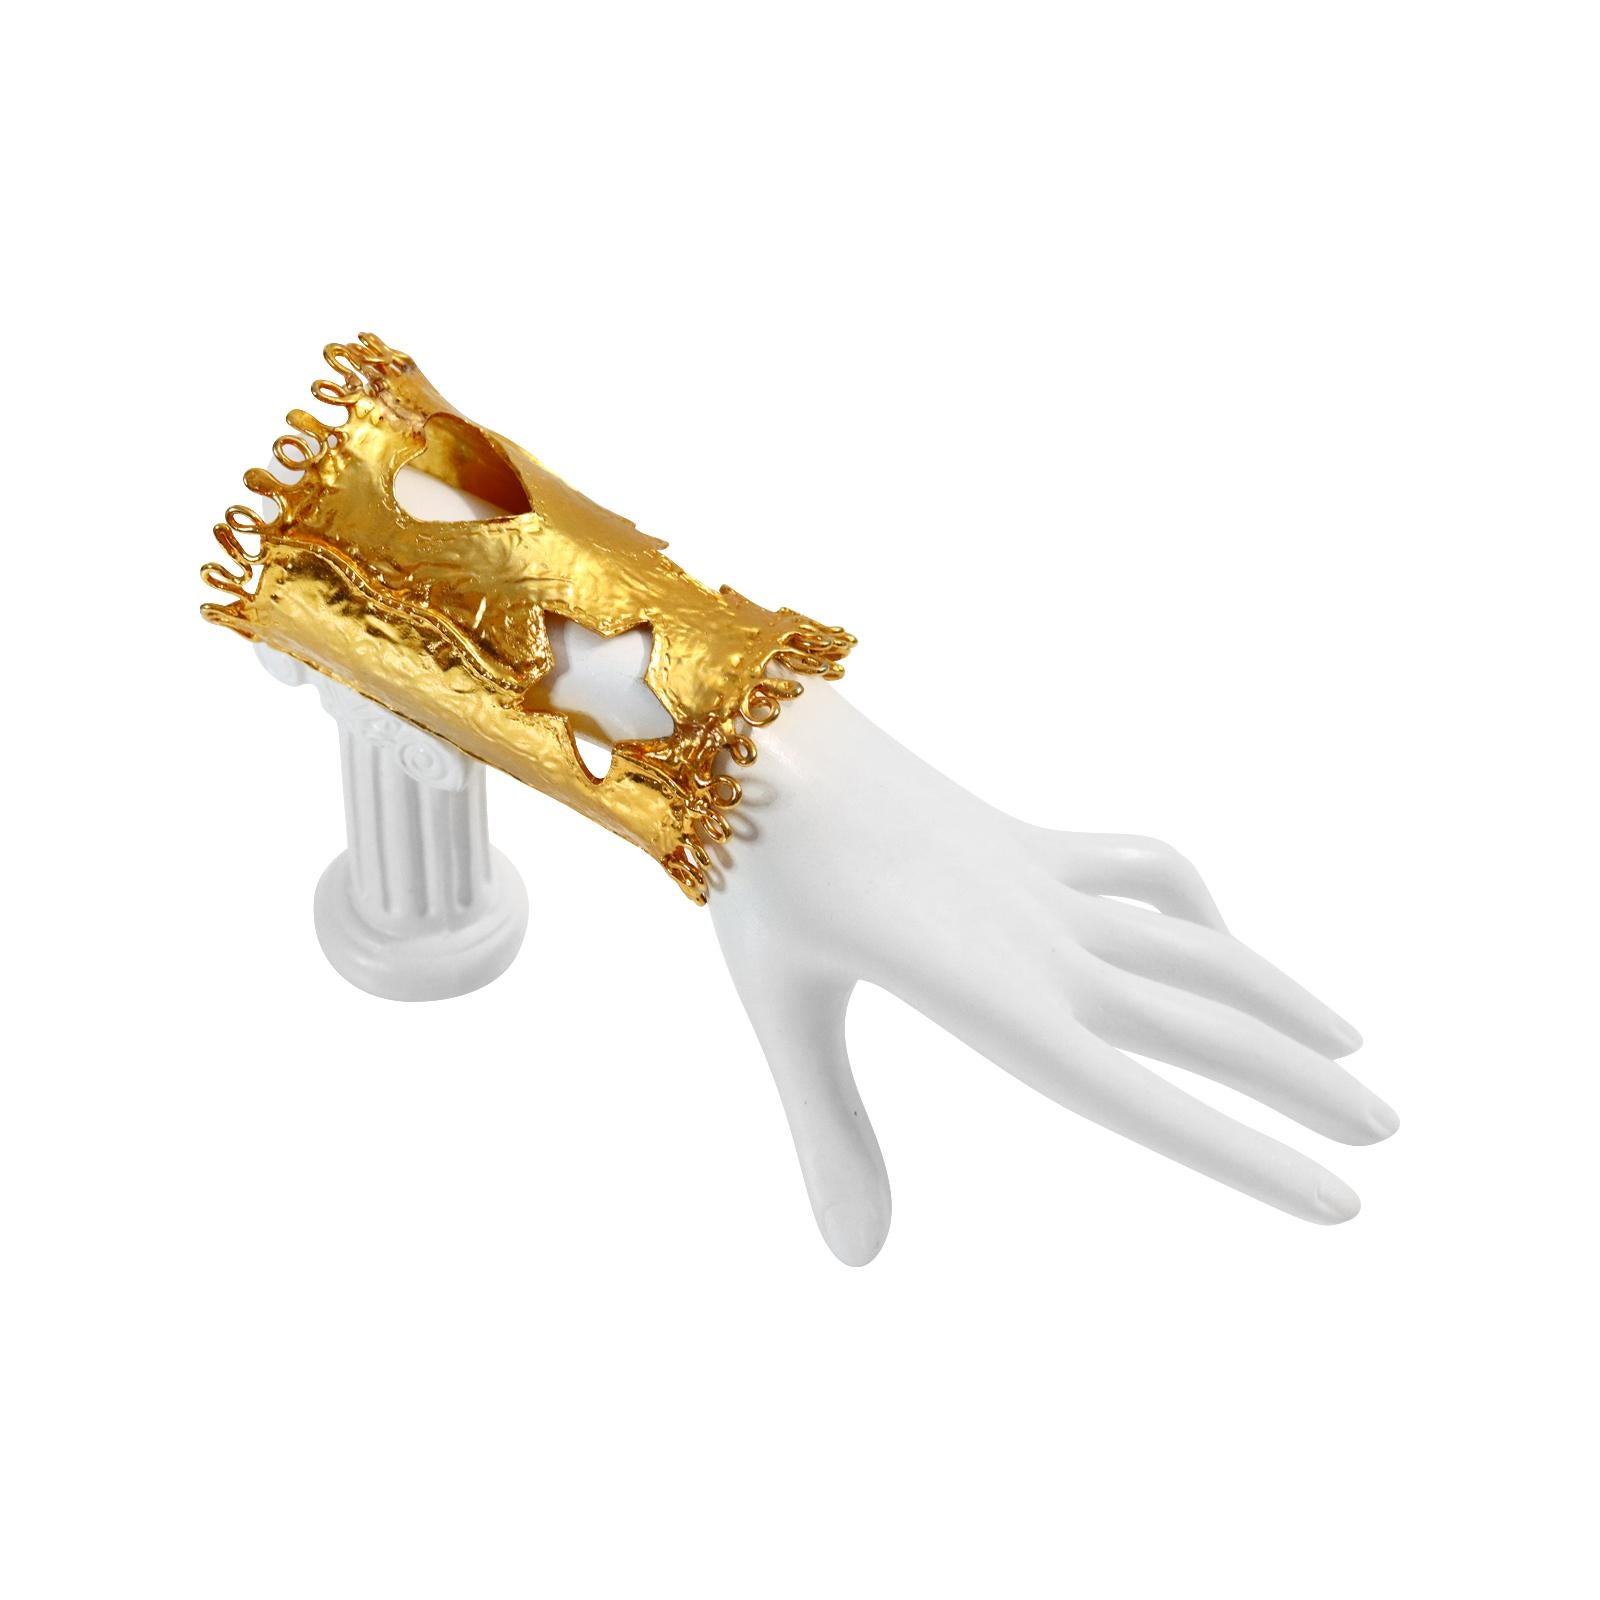 Women's or Men's Vintage Christian Lacroix Gold Iconic Cutout Cuff, Circa 1990s For Sale